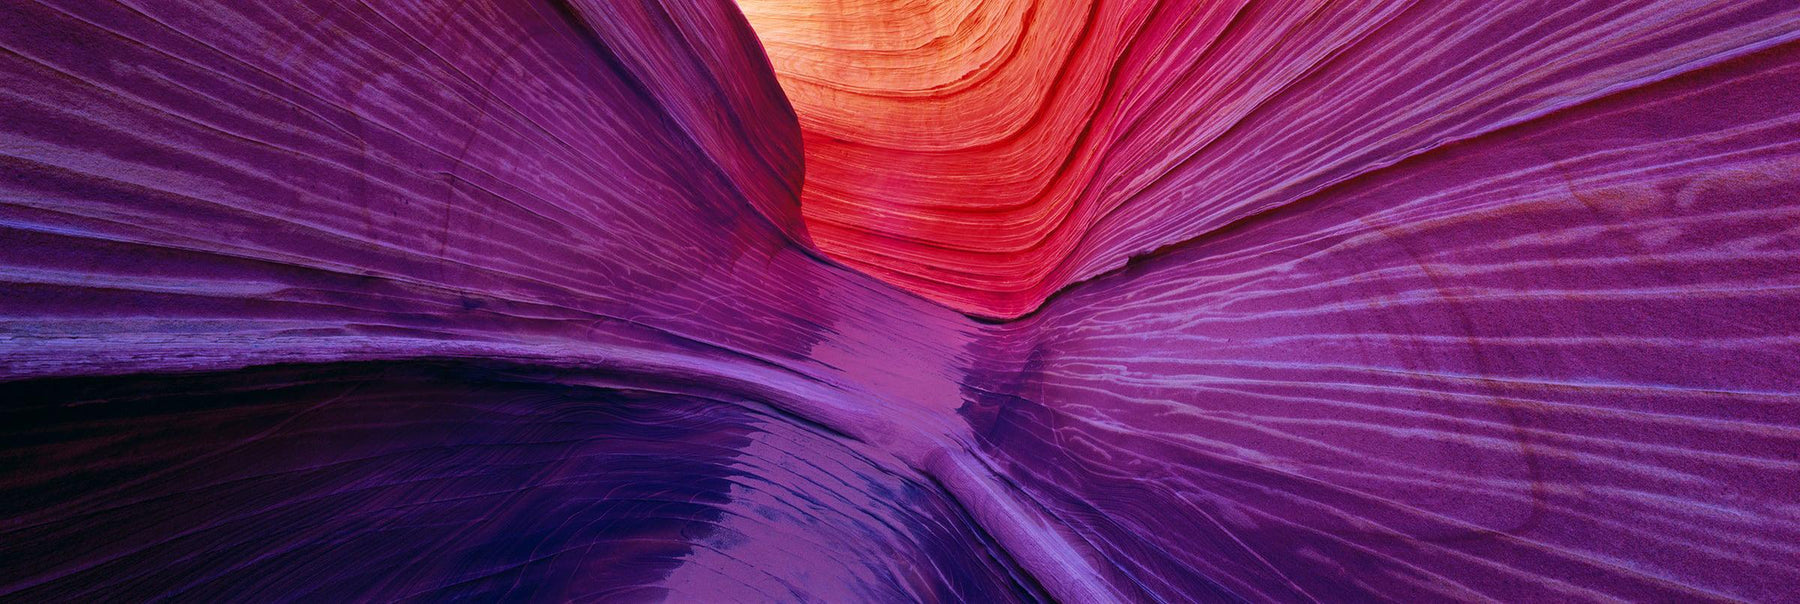 Purple red and pink sandstone walls of Vermillion Cliffs National Monument Arizona